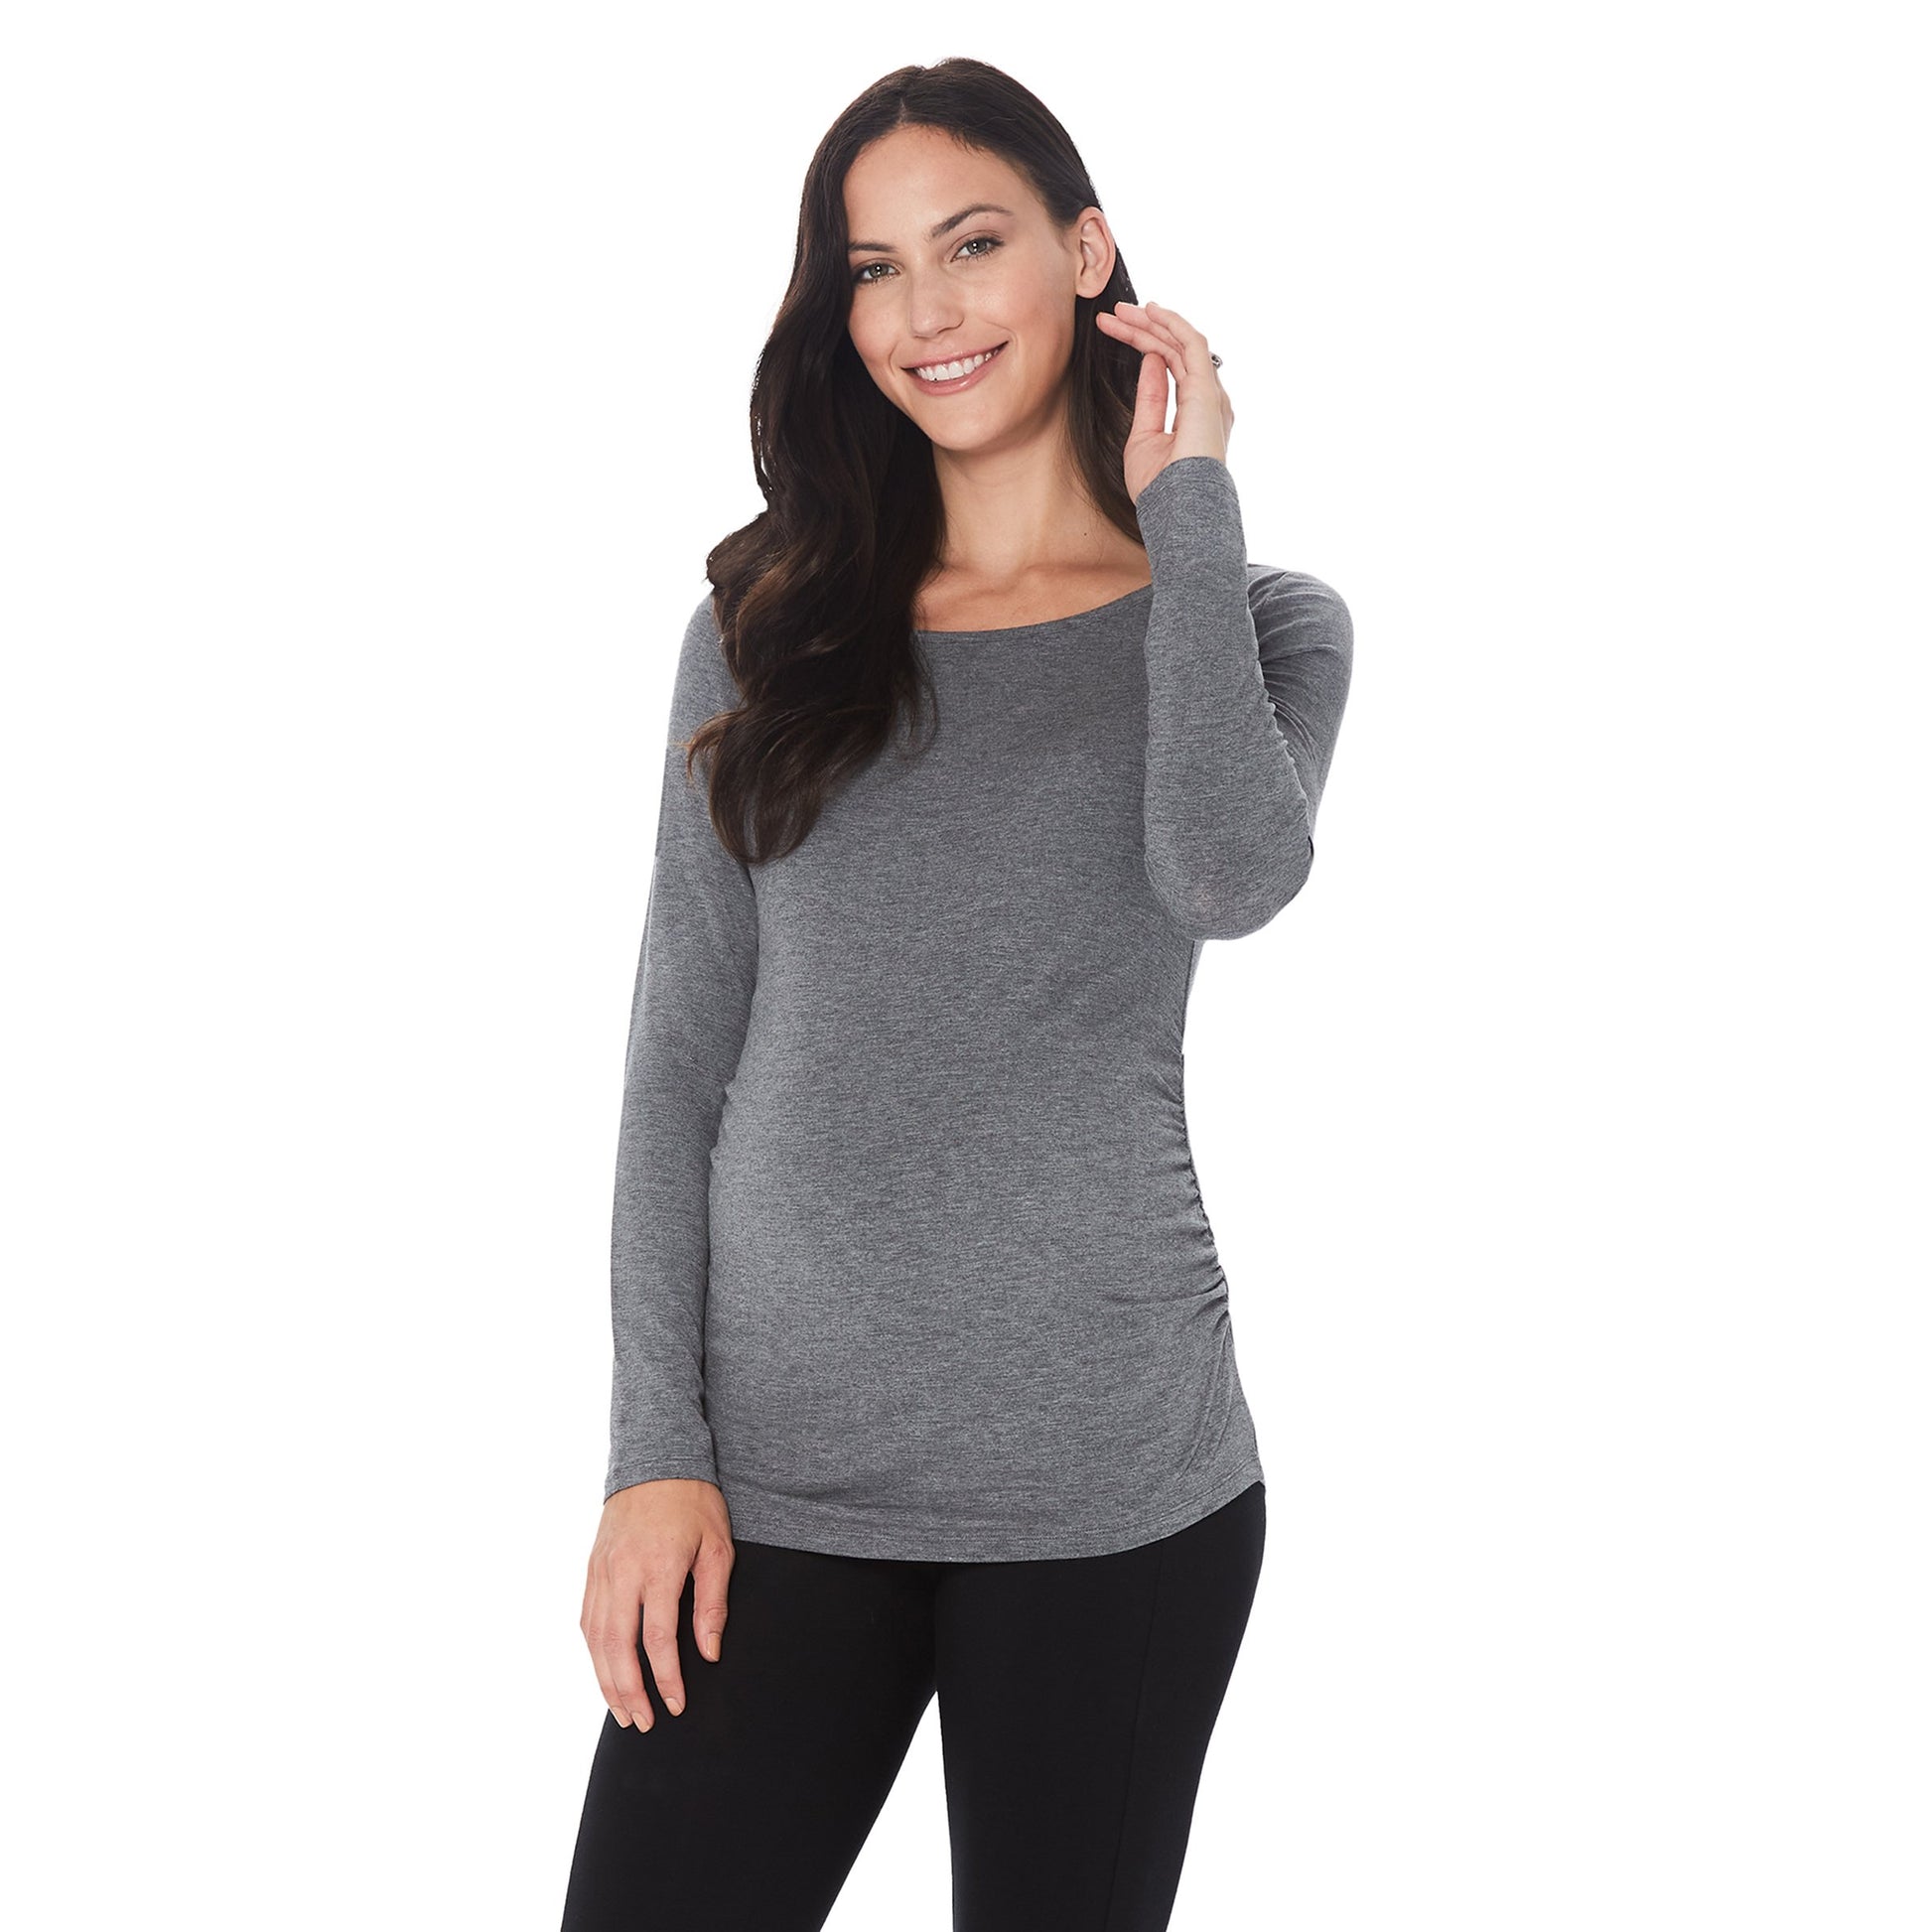 Charcoal Heather;Model is wearing a size S. She is 5’11”, Bust 34”, Waist 30.5”, Hips 40”.#Model is wearing a maternity bump.@ A lady wearingSoftwear with Stretch Maternity Ballet Neck Top with Charcoal Heather print